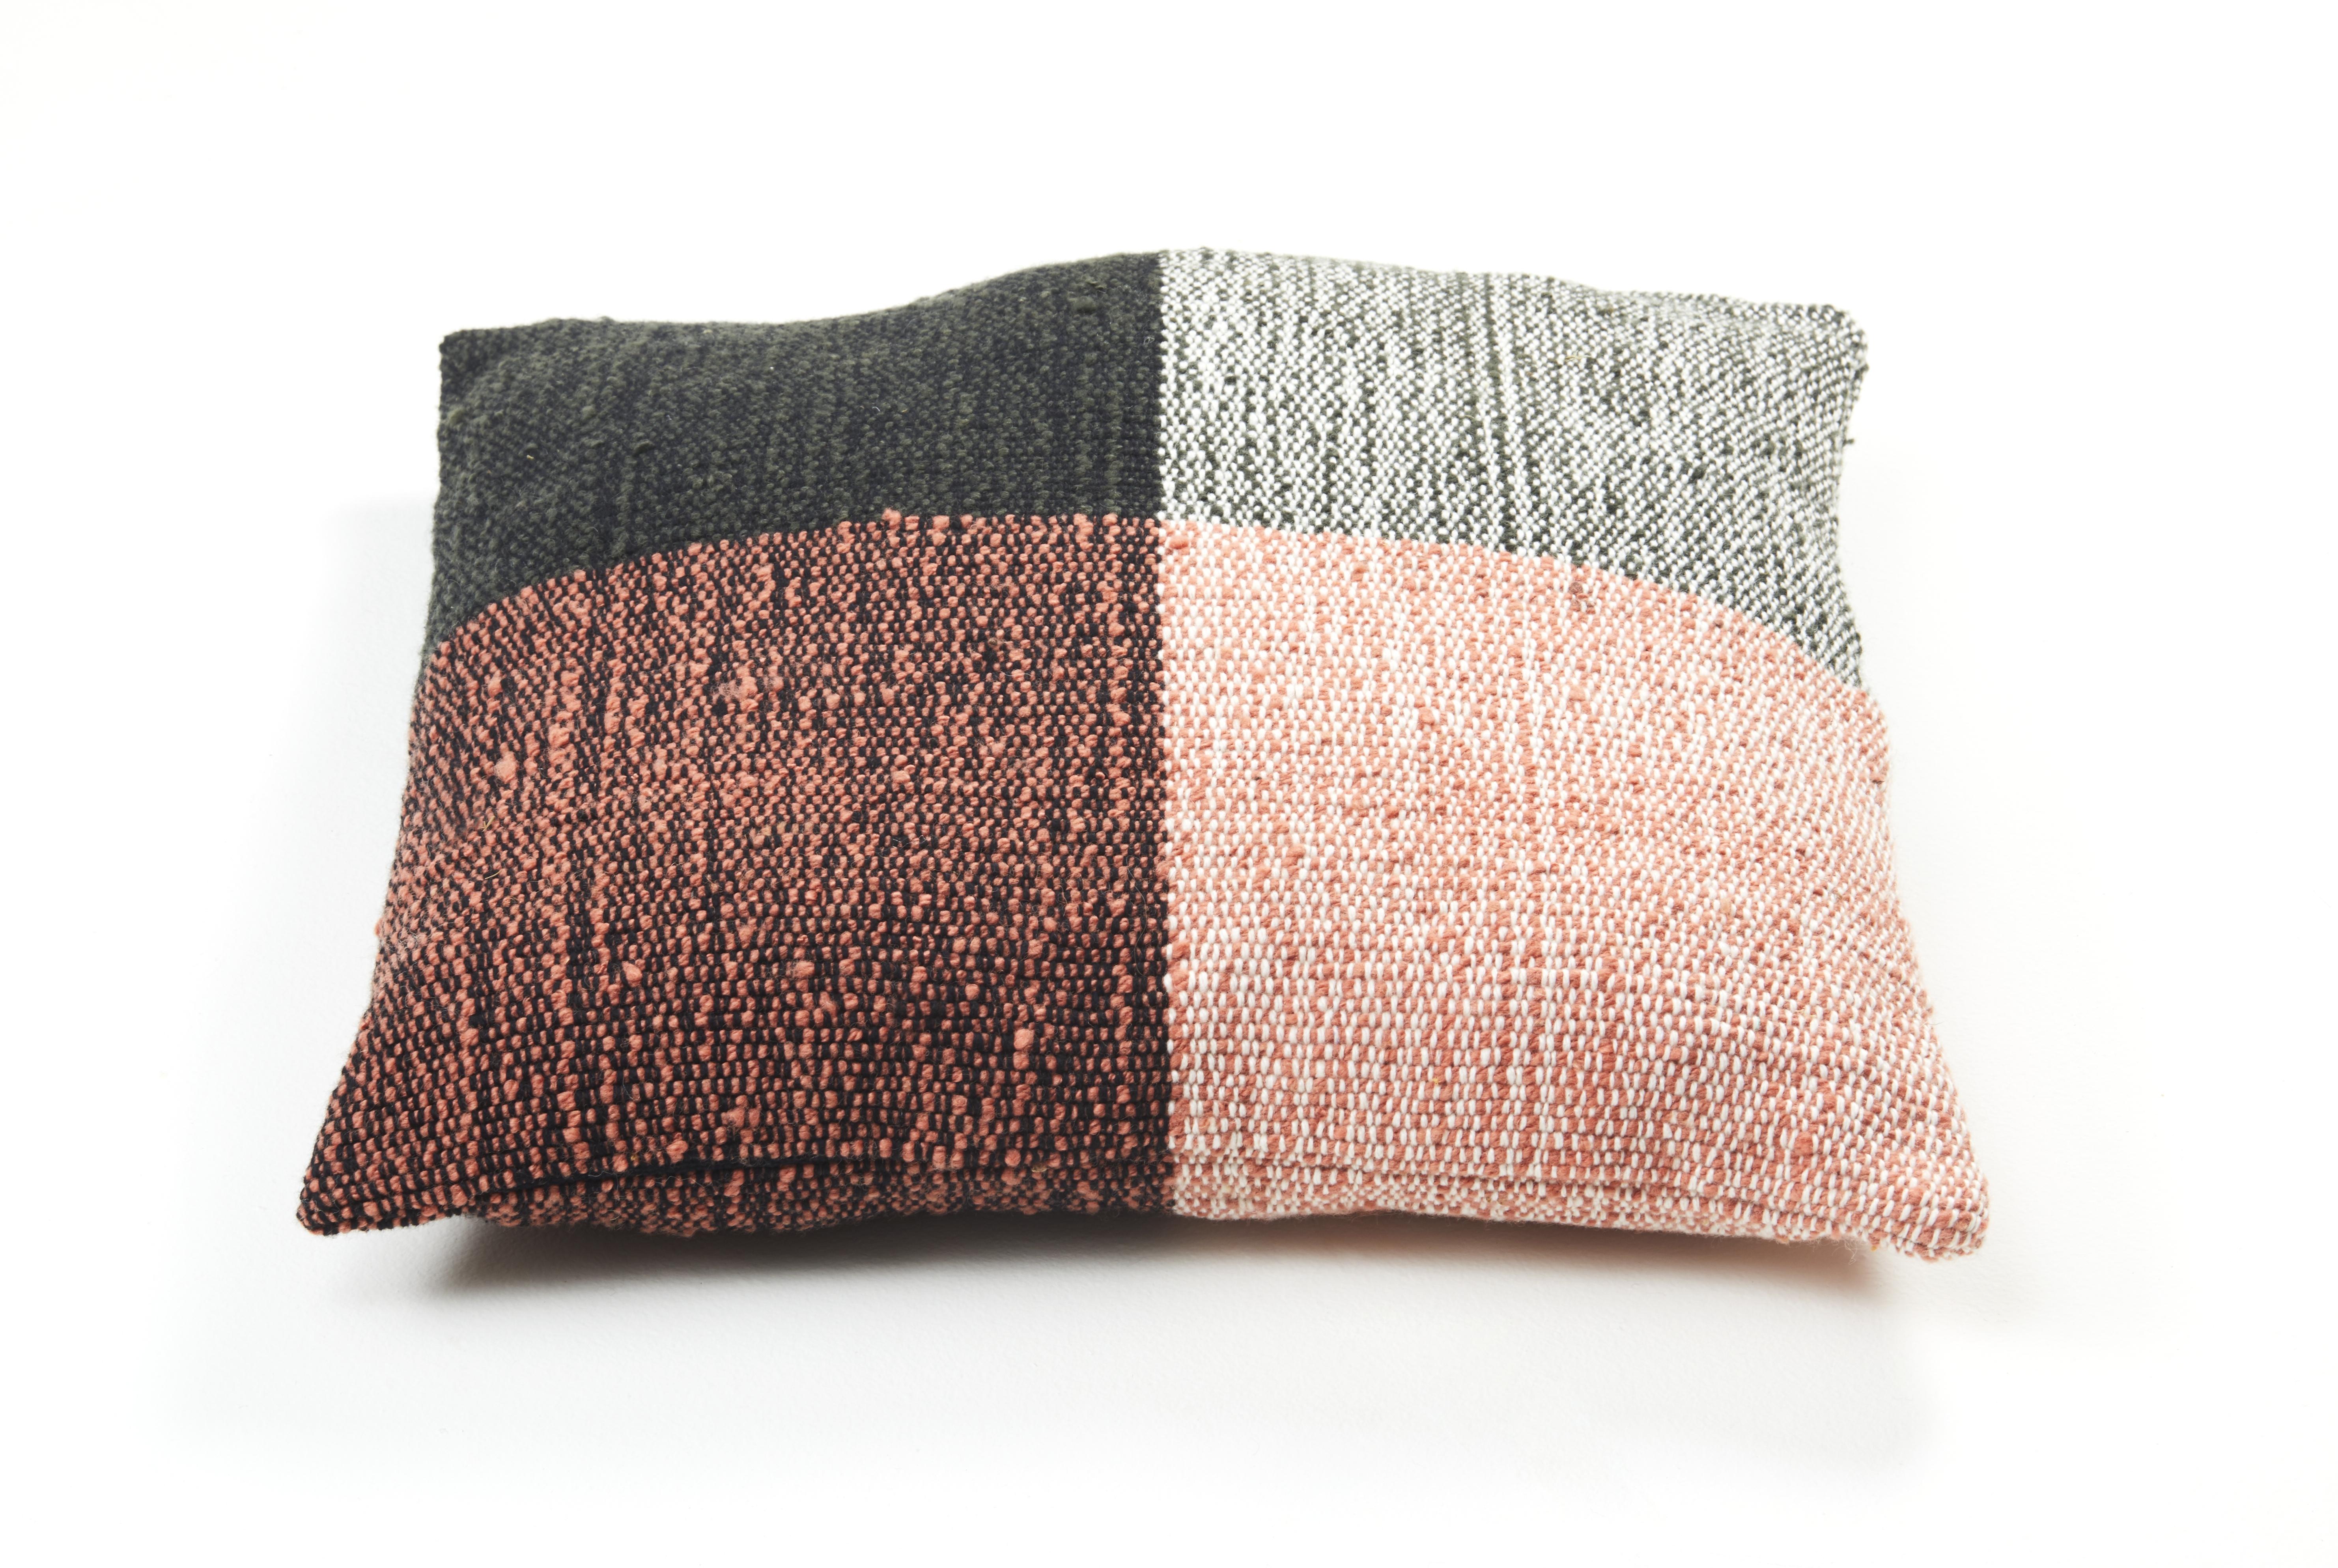 Small nobsa cushion by Sebastian Herkner
Materials: 100% natural virgin wool. 
Technique: Hand-woven in Colombia. 
Dimensions: W 50 x H 50 cm 
Available in colors: Grey/ grey/ cream, grey/ ochre/ cream, red/ ochre/ cream, blue/ mint/ cream,